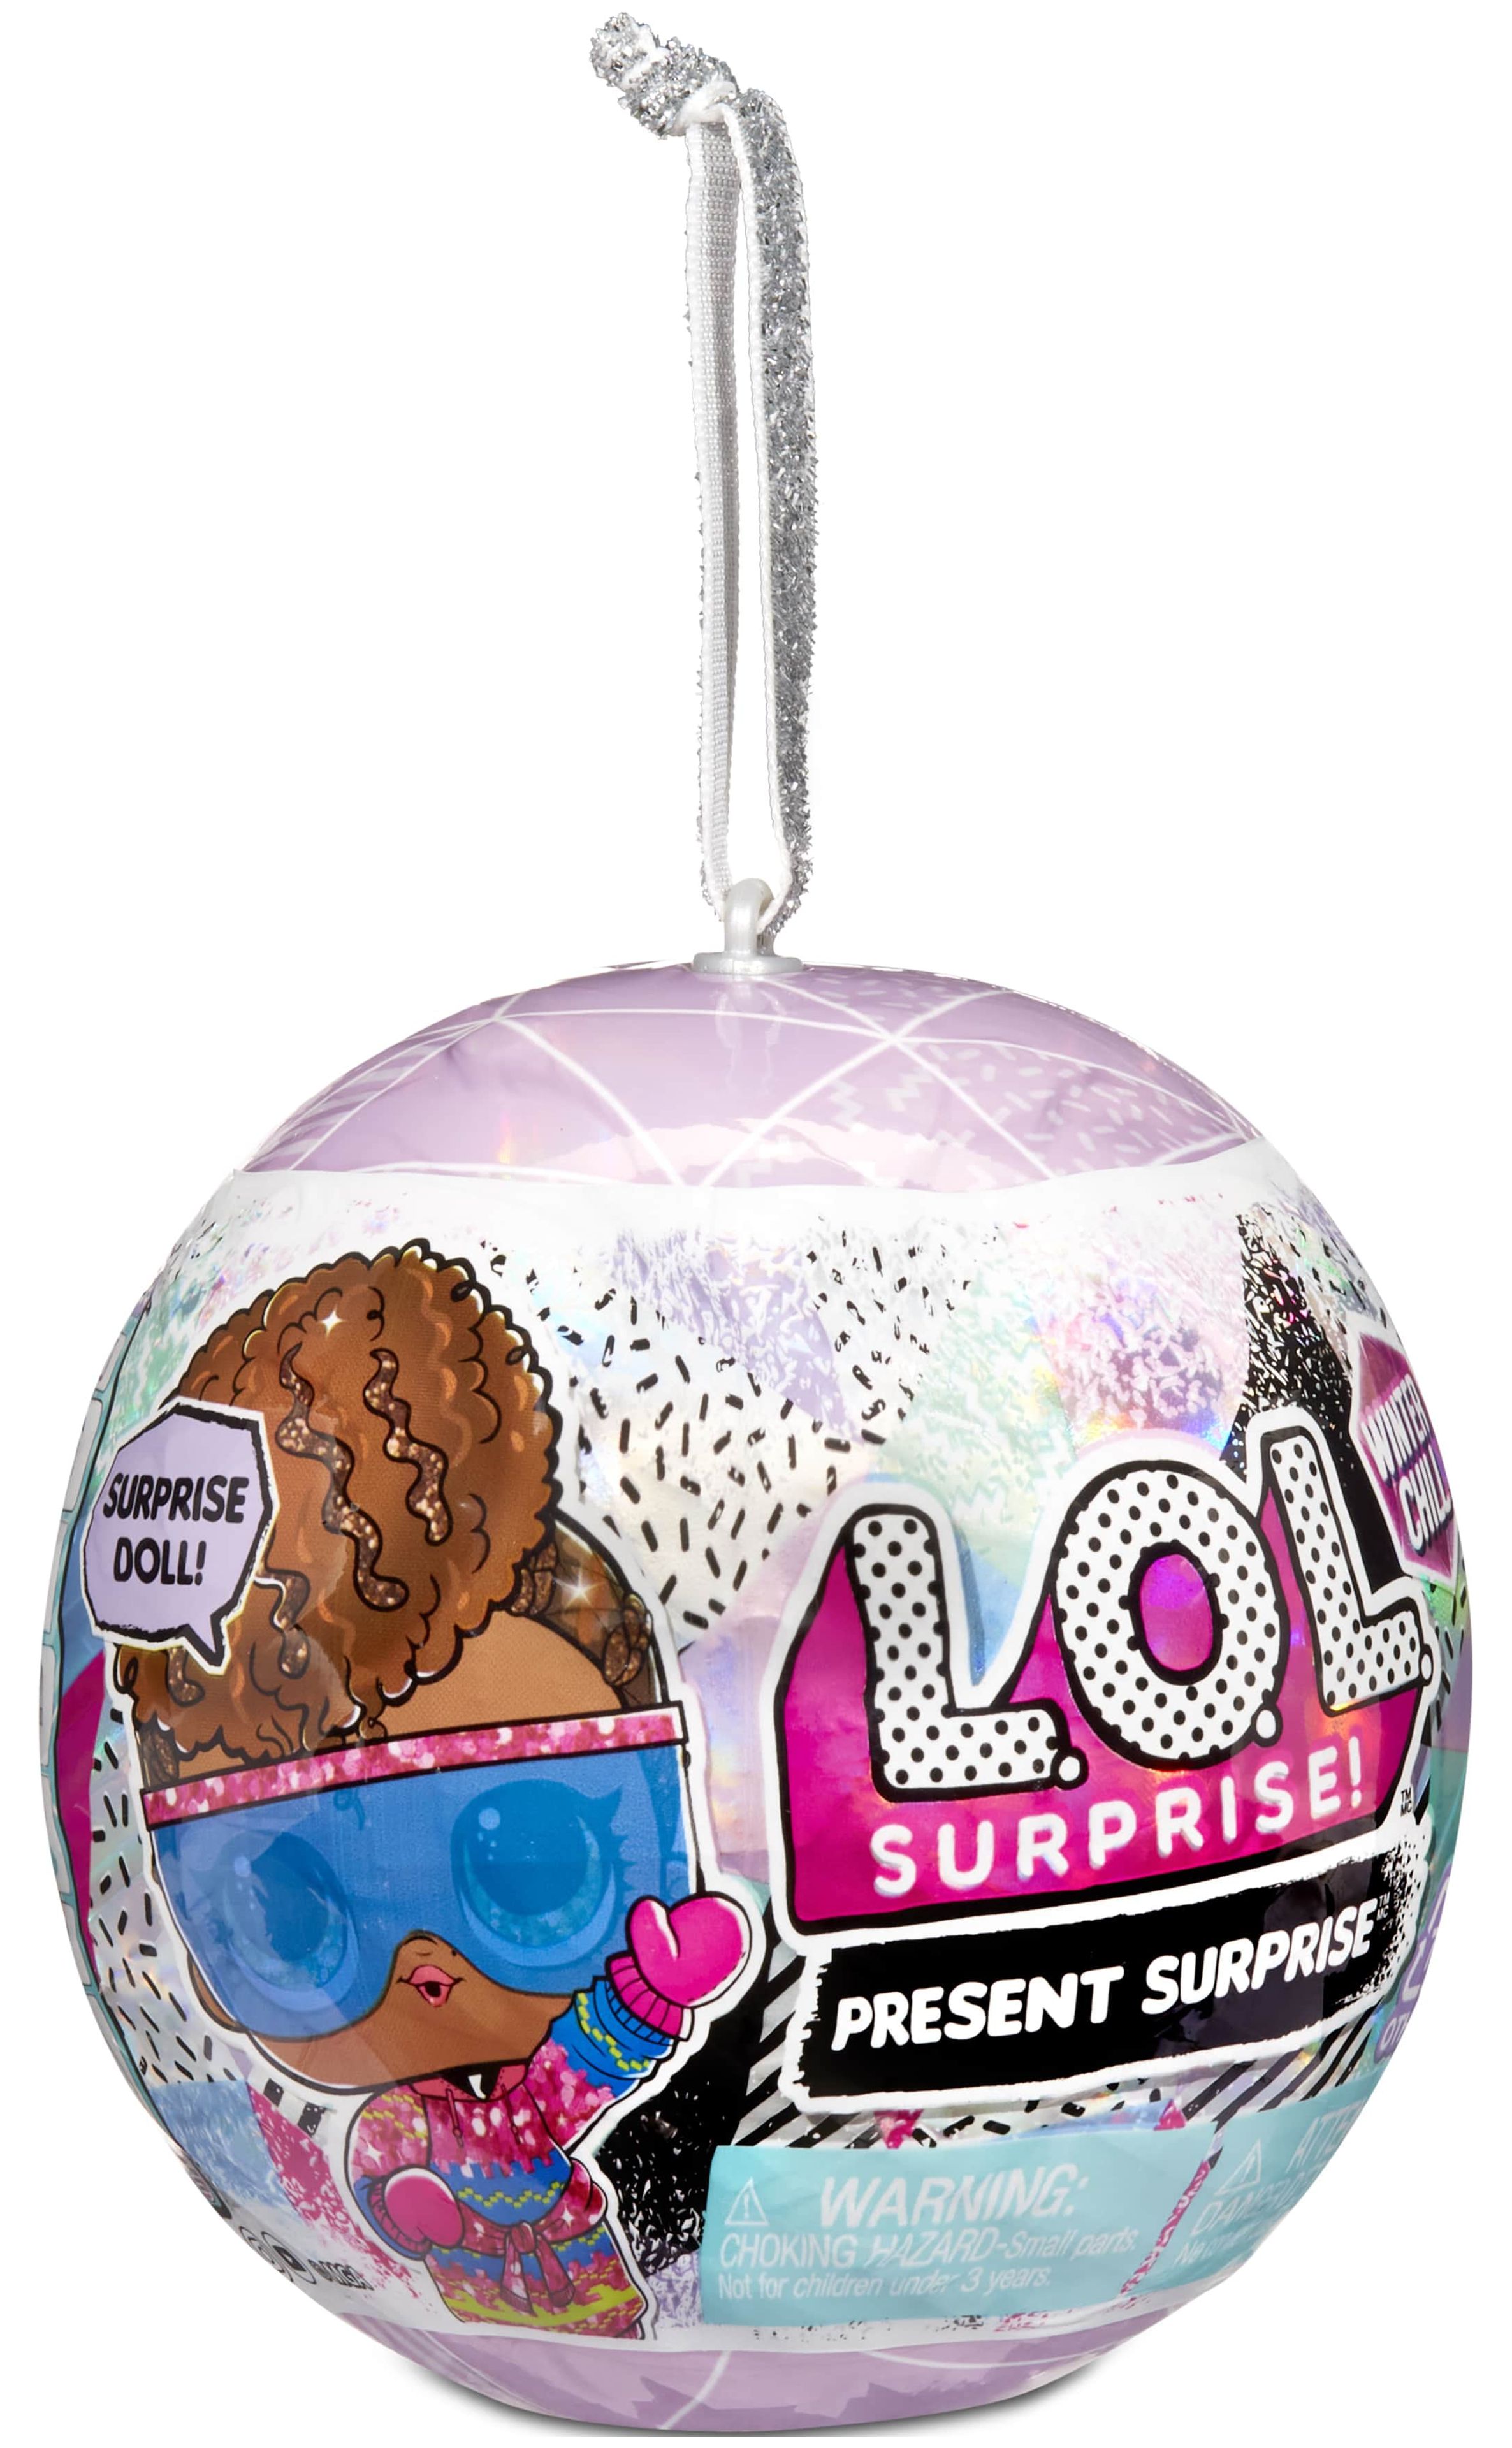 LOL Surprise Winter Chill Dolls With 8 Surprises Including Collectible Doll, Fashions, Doll Accessories, Holiday Ornament Reusable Packaging – Great Gift for Girls Ages 4+ - image 4 of 10